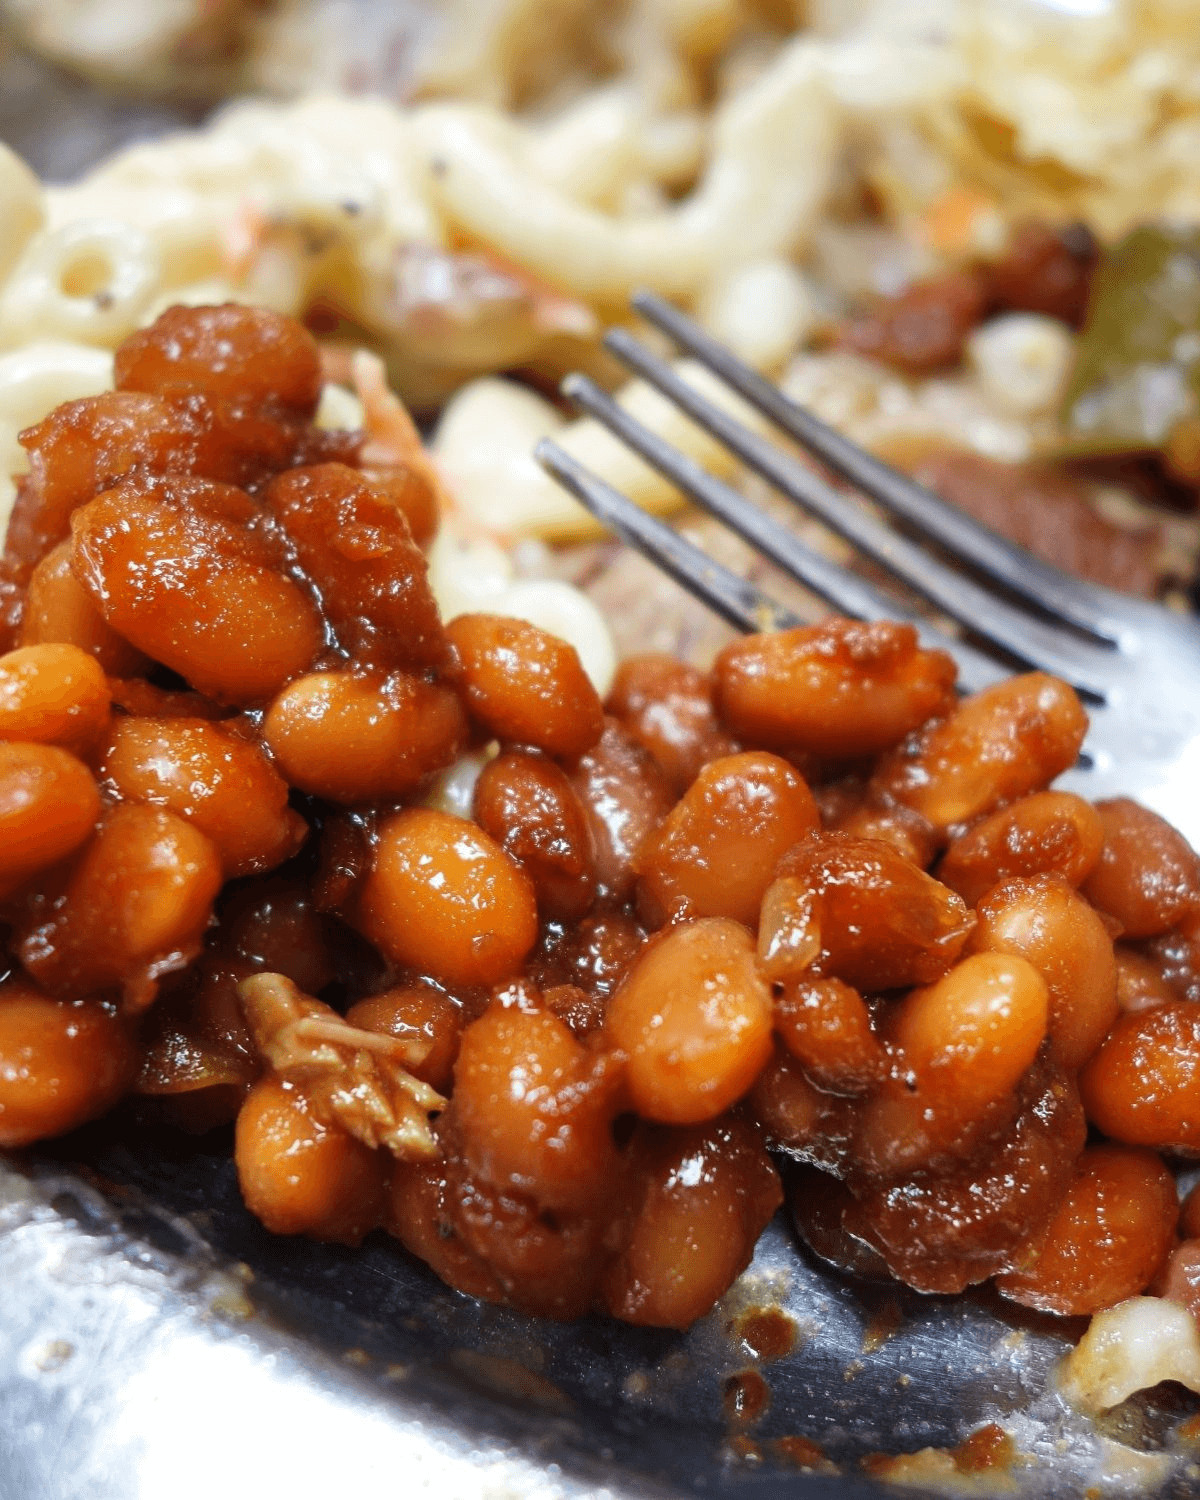 A plate of southern style baked beans.